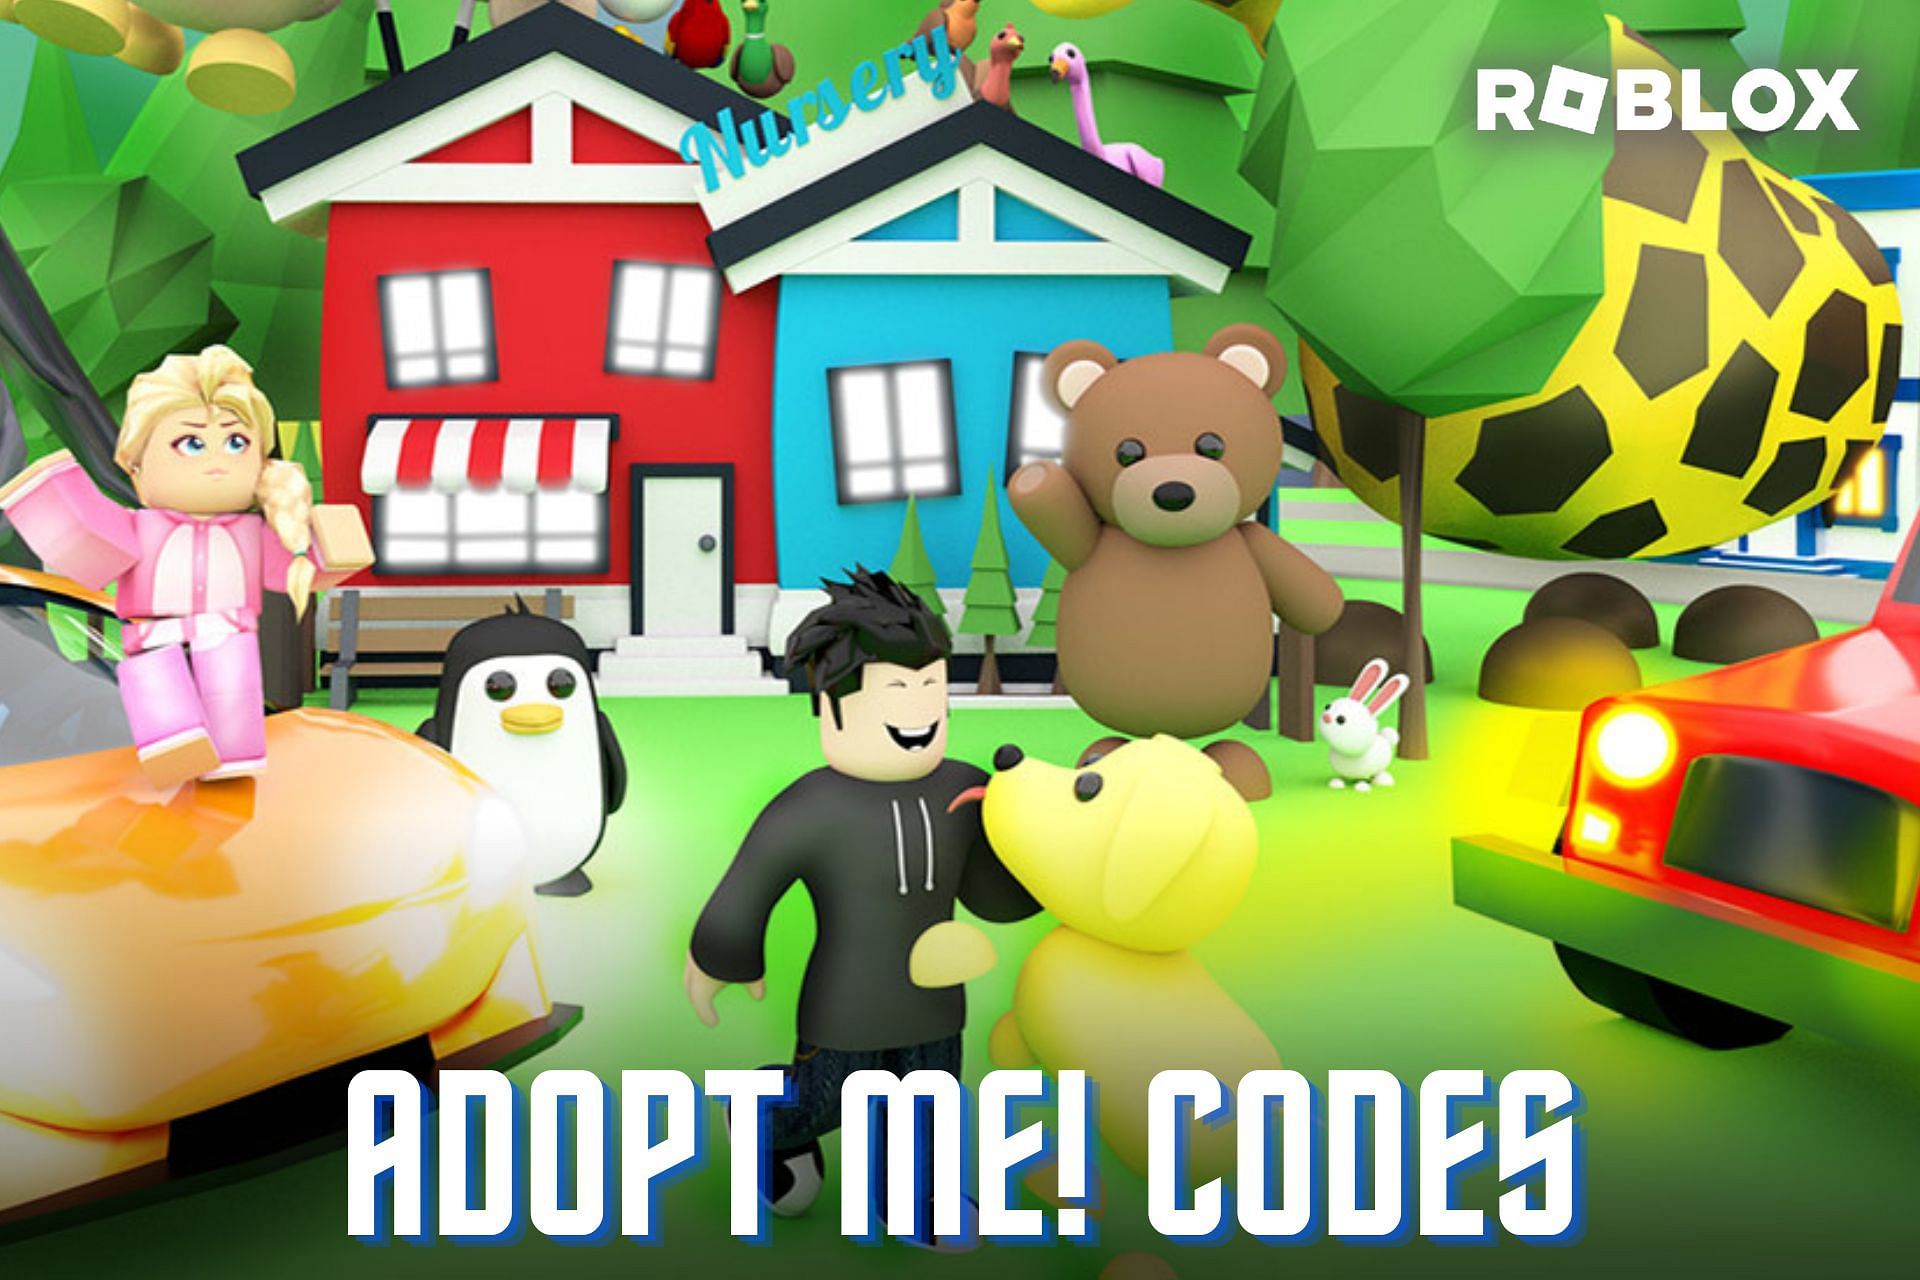 Roblox Adopt Me! codes (December 2022) Inactive Codes, Usability, and